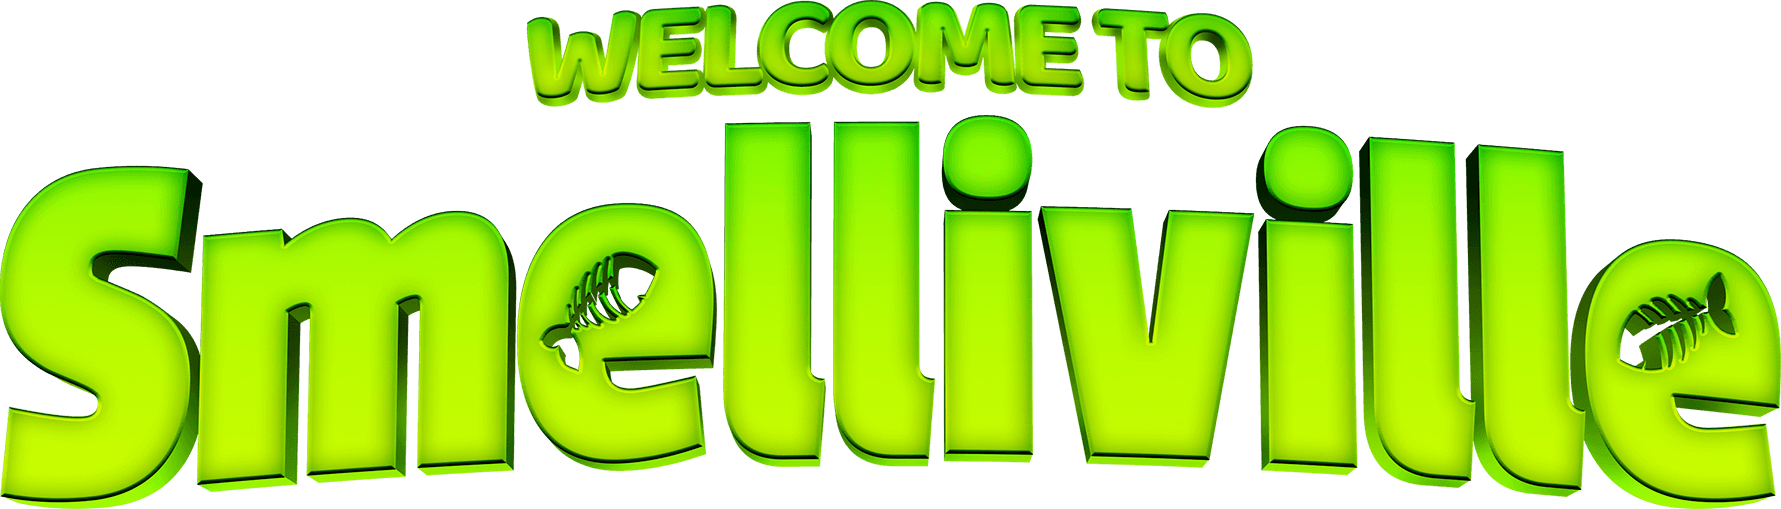 Welcome to Smelliville logo